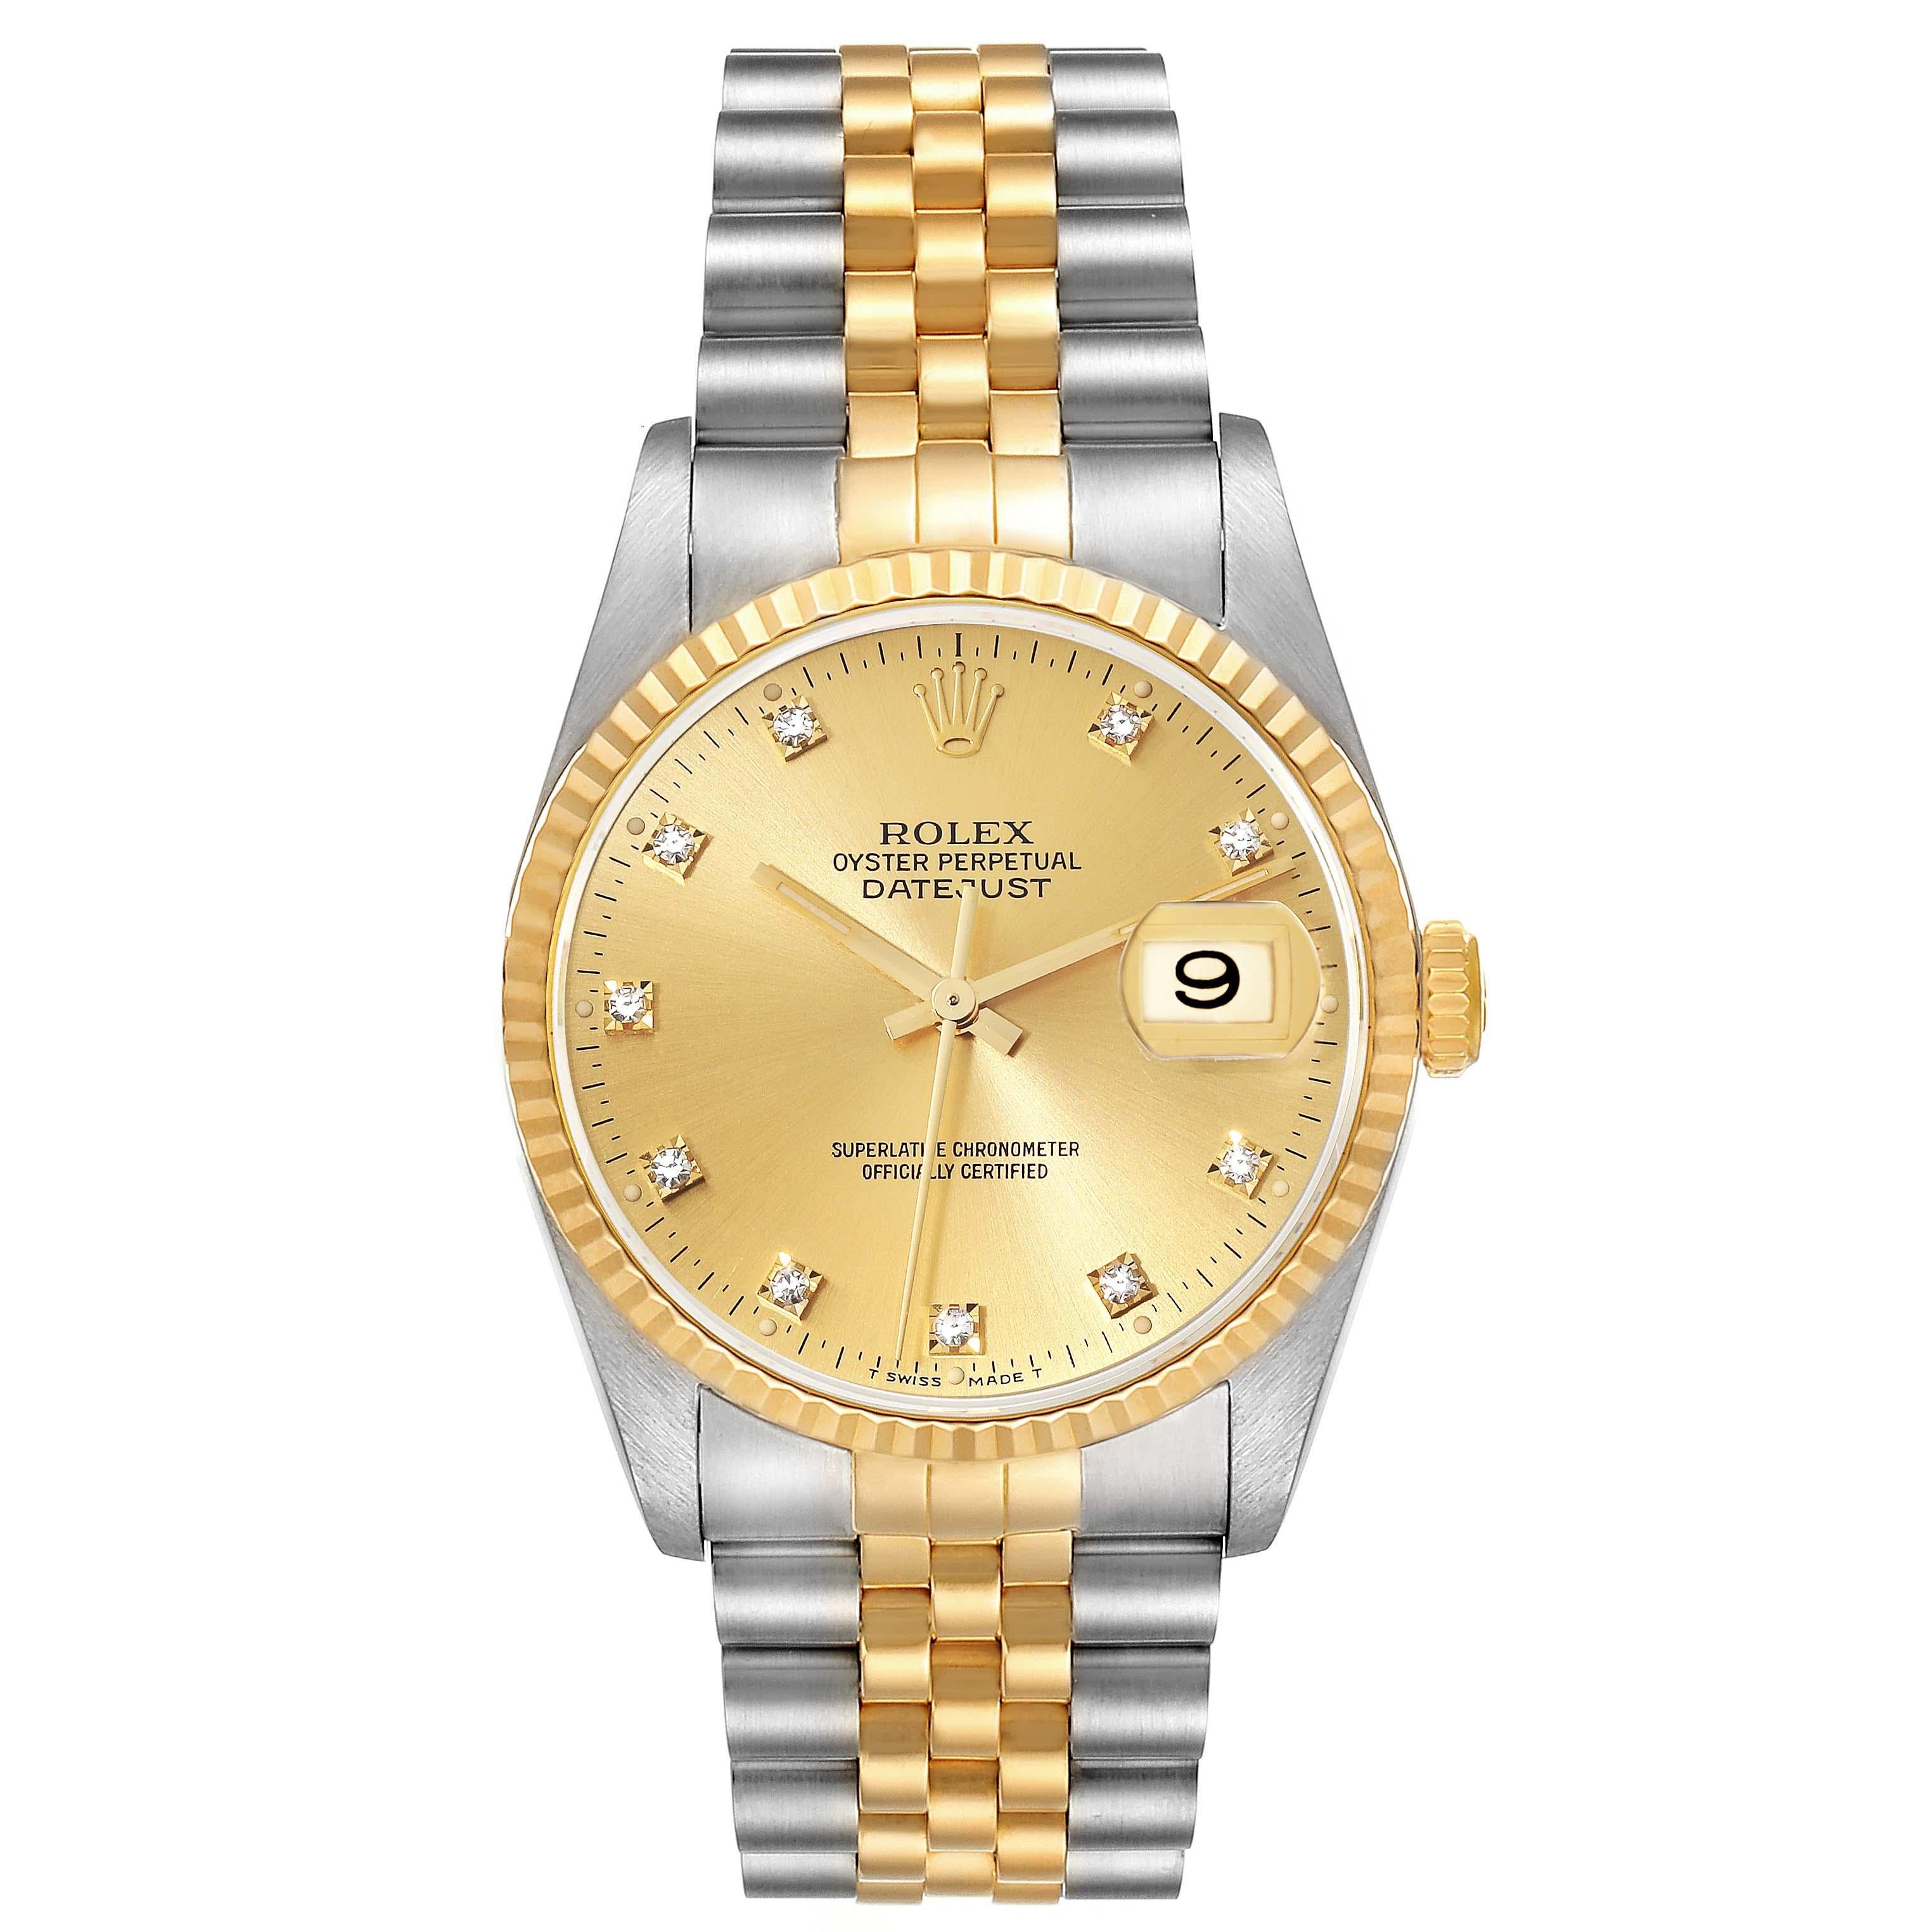 Rolex Datejust Diamond Dial Steel Yellow Gold Mens Watch 16233 Box Papers. Officially certified chronometer automatic self-winding movement. Stainless steel case 36.0 mm in diameter.  Rolex logo on an 18K yellow gold crown. 18k yellow gold fluted